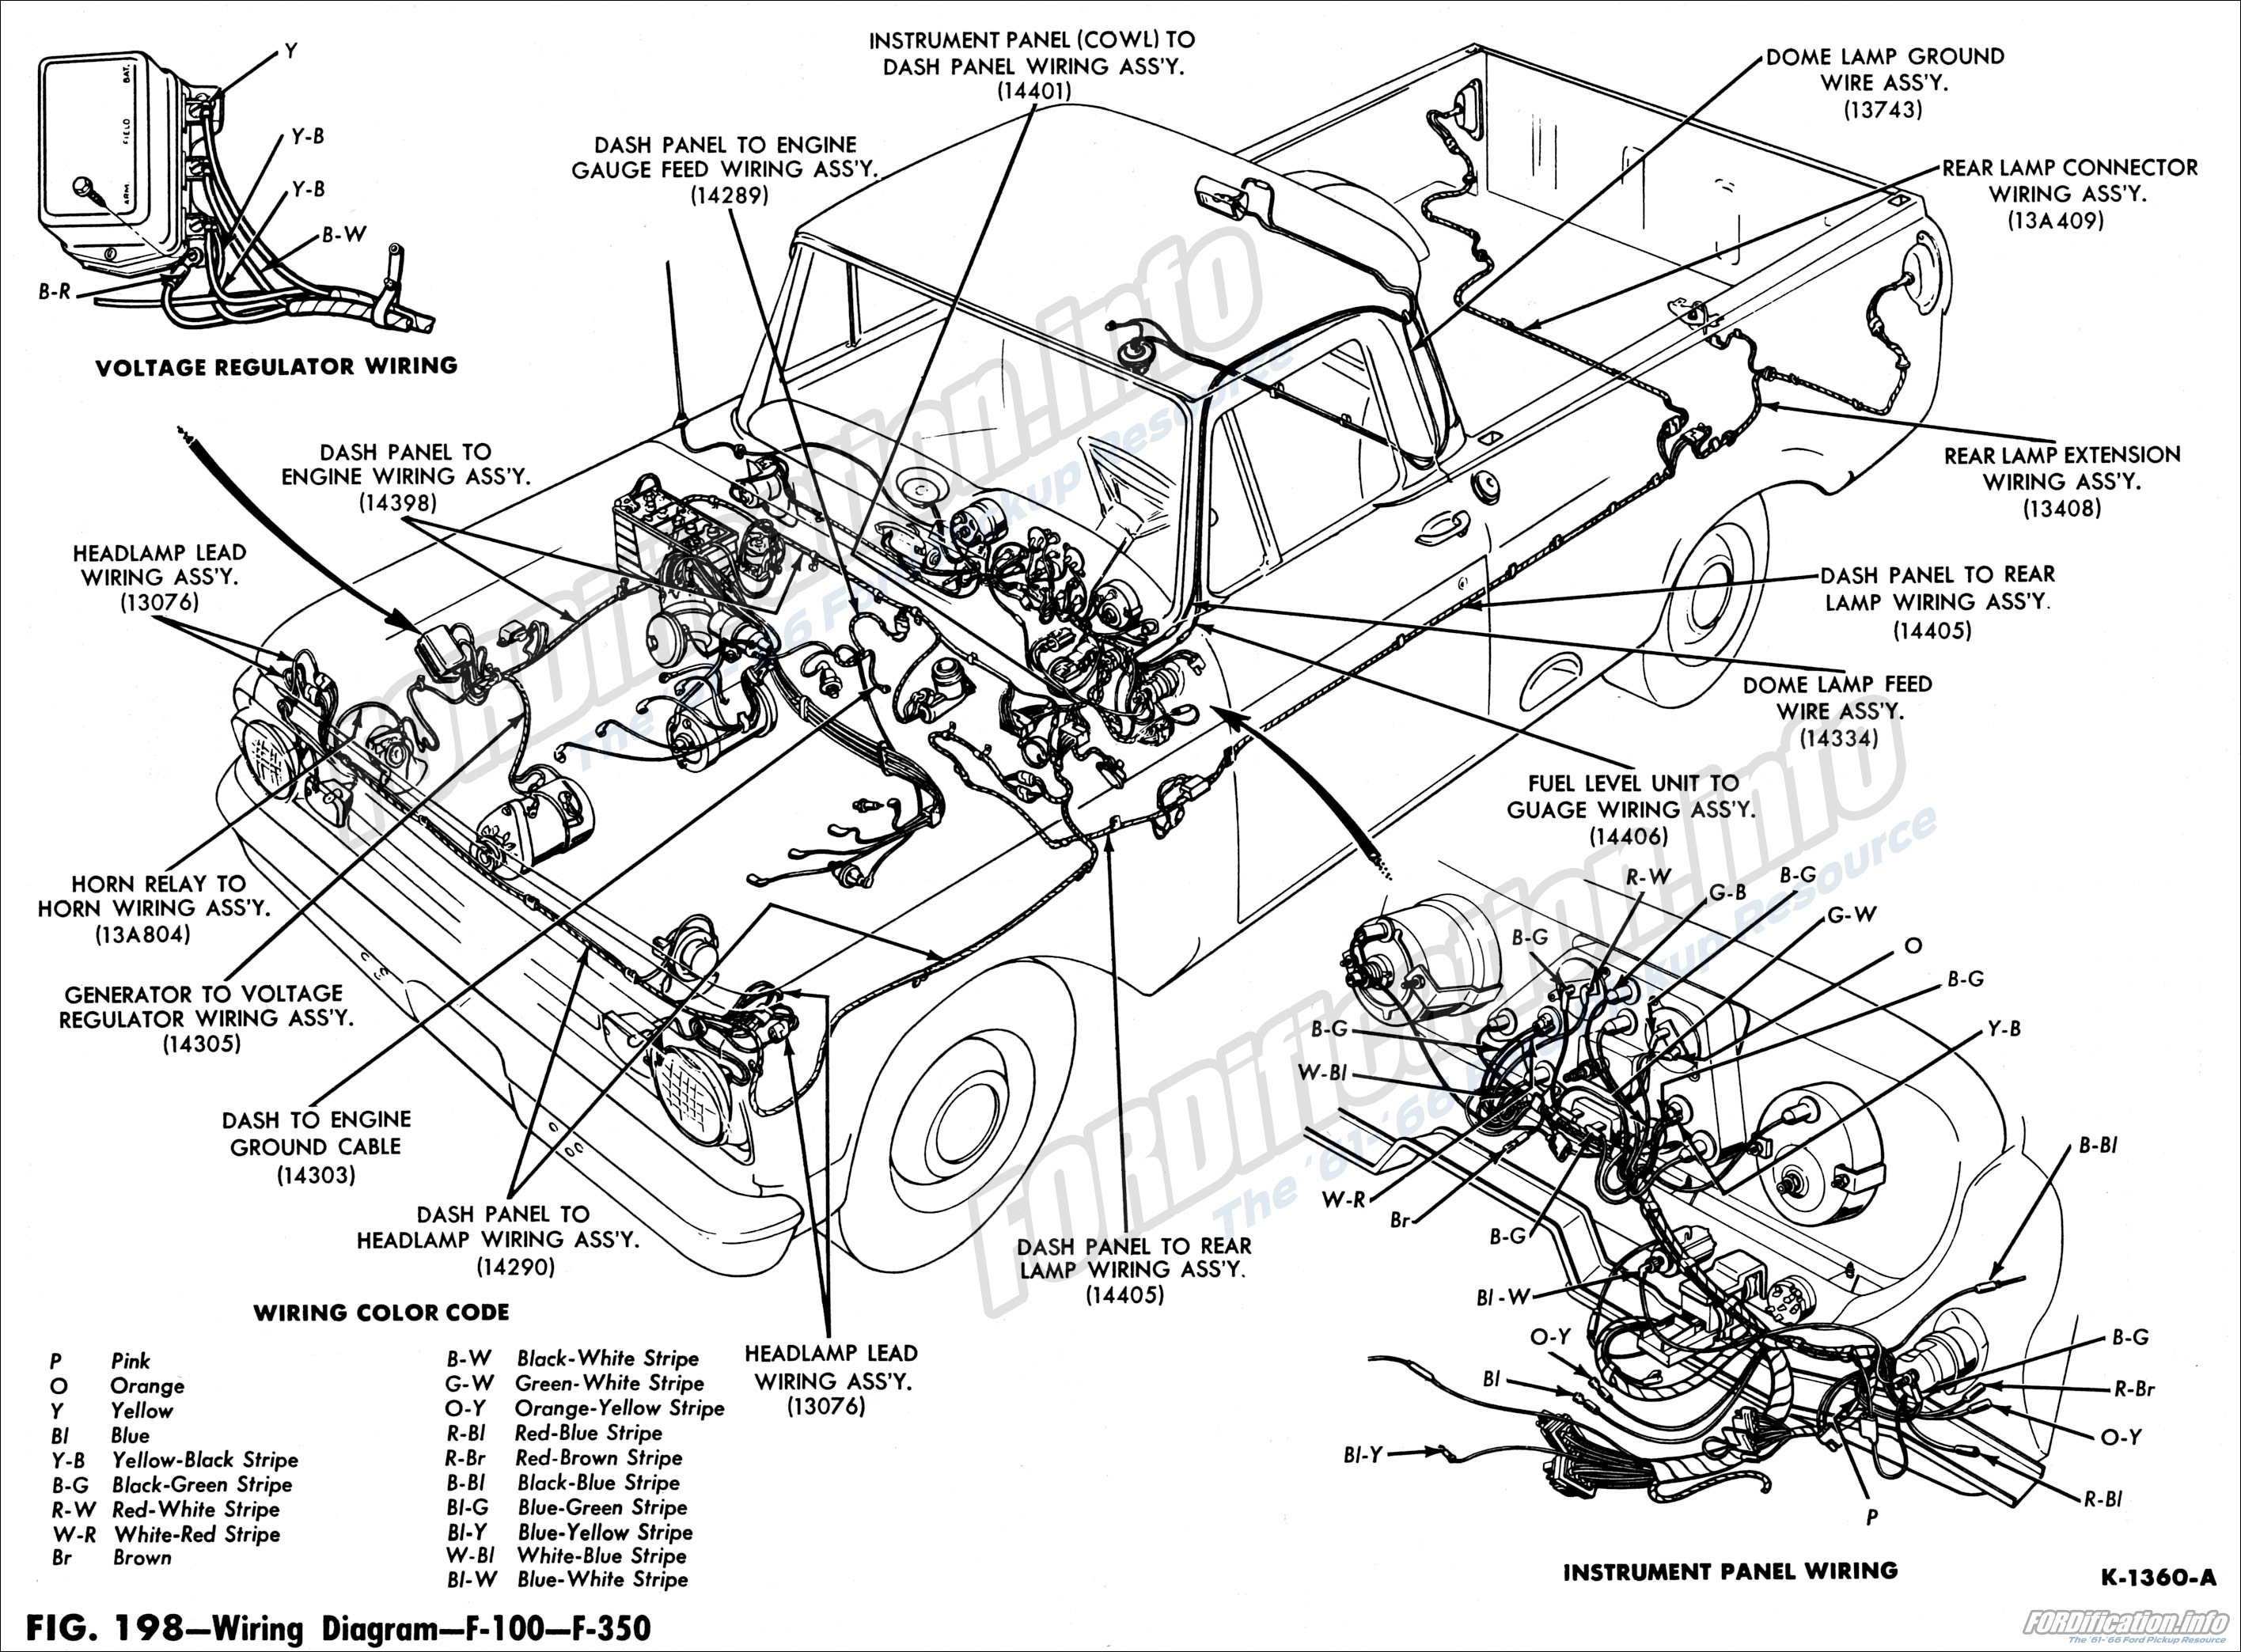 1963 Ford Truck Wiring Diagrams - FORDification.info - The '61-'66 Ford  Pickup Resource  1961 Ford 1.5 Ton Truck Wiring Diagram    FORDification.info